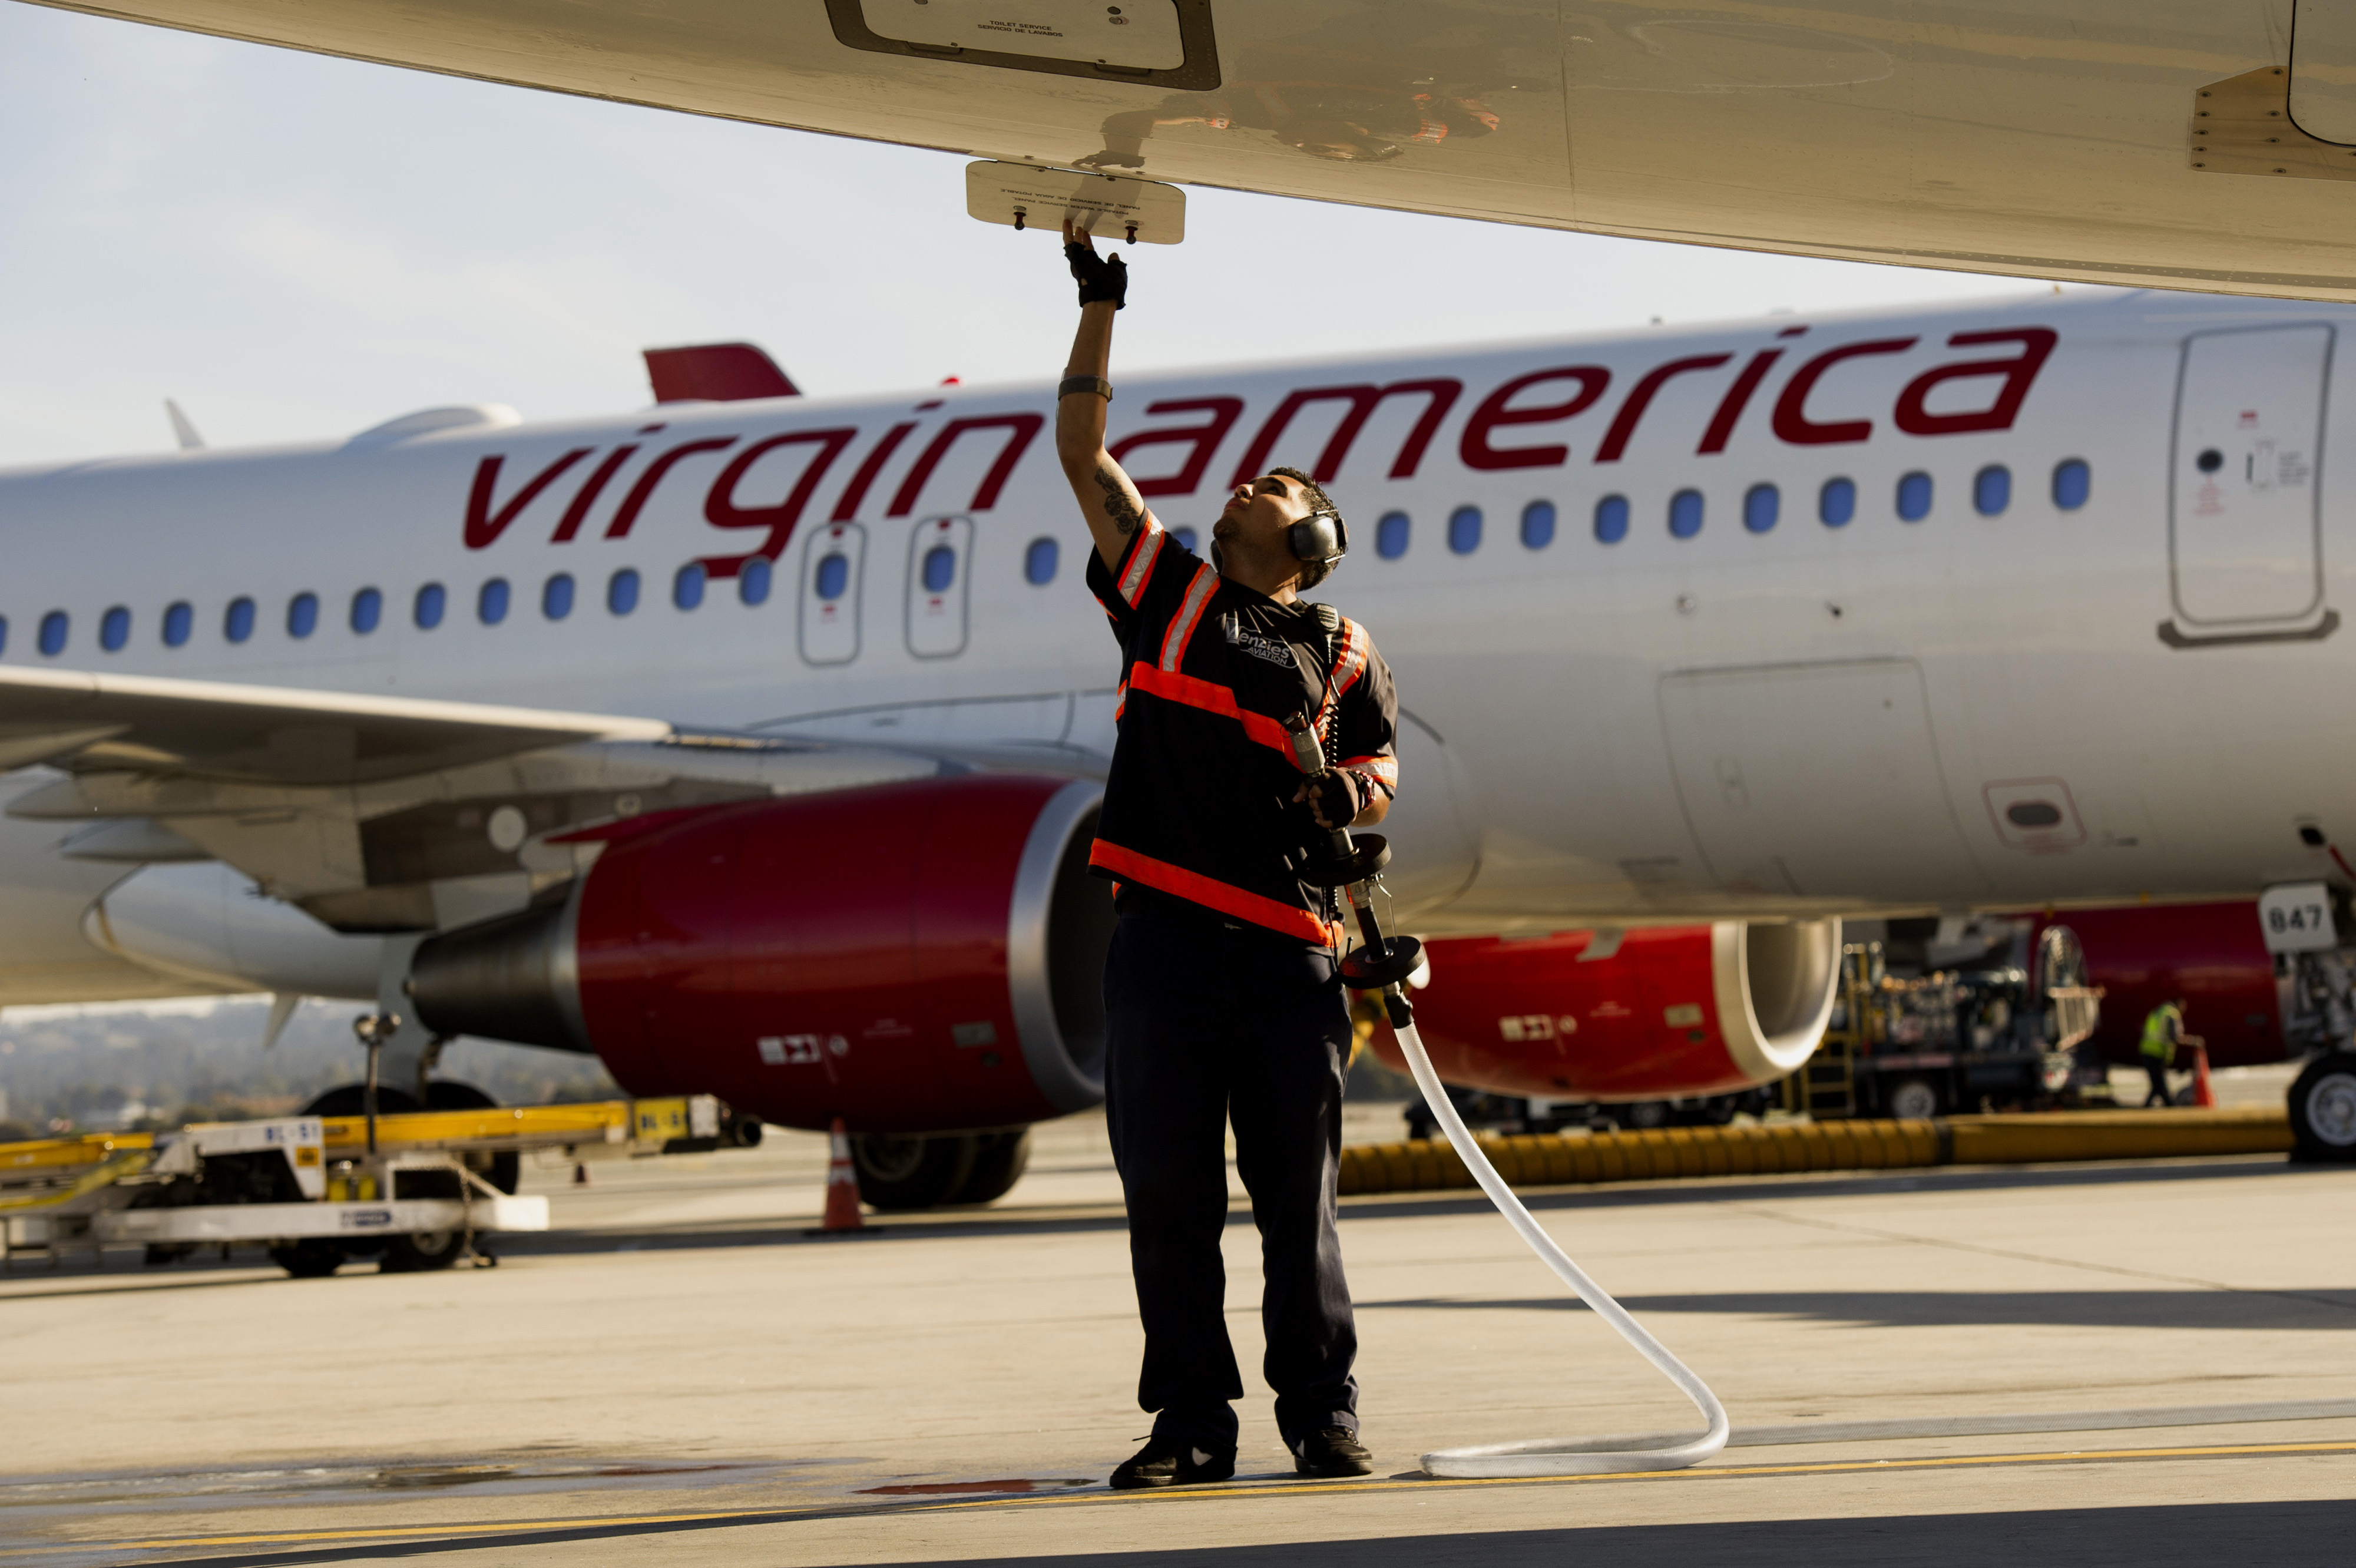 Operations Inside The Virgin America Inc. Terminal After Filing For IPO